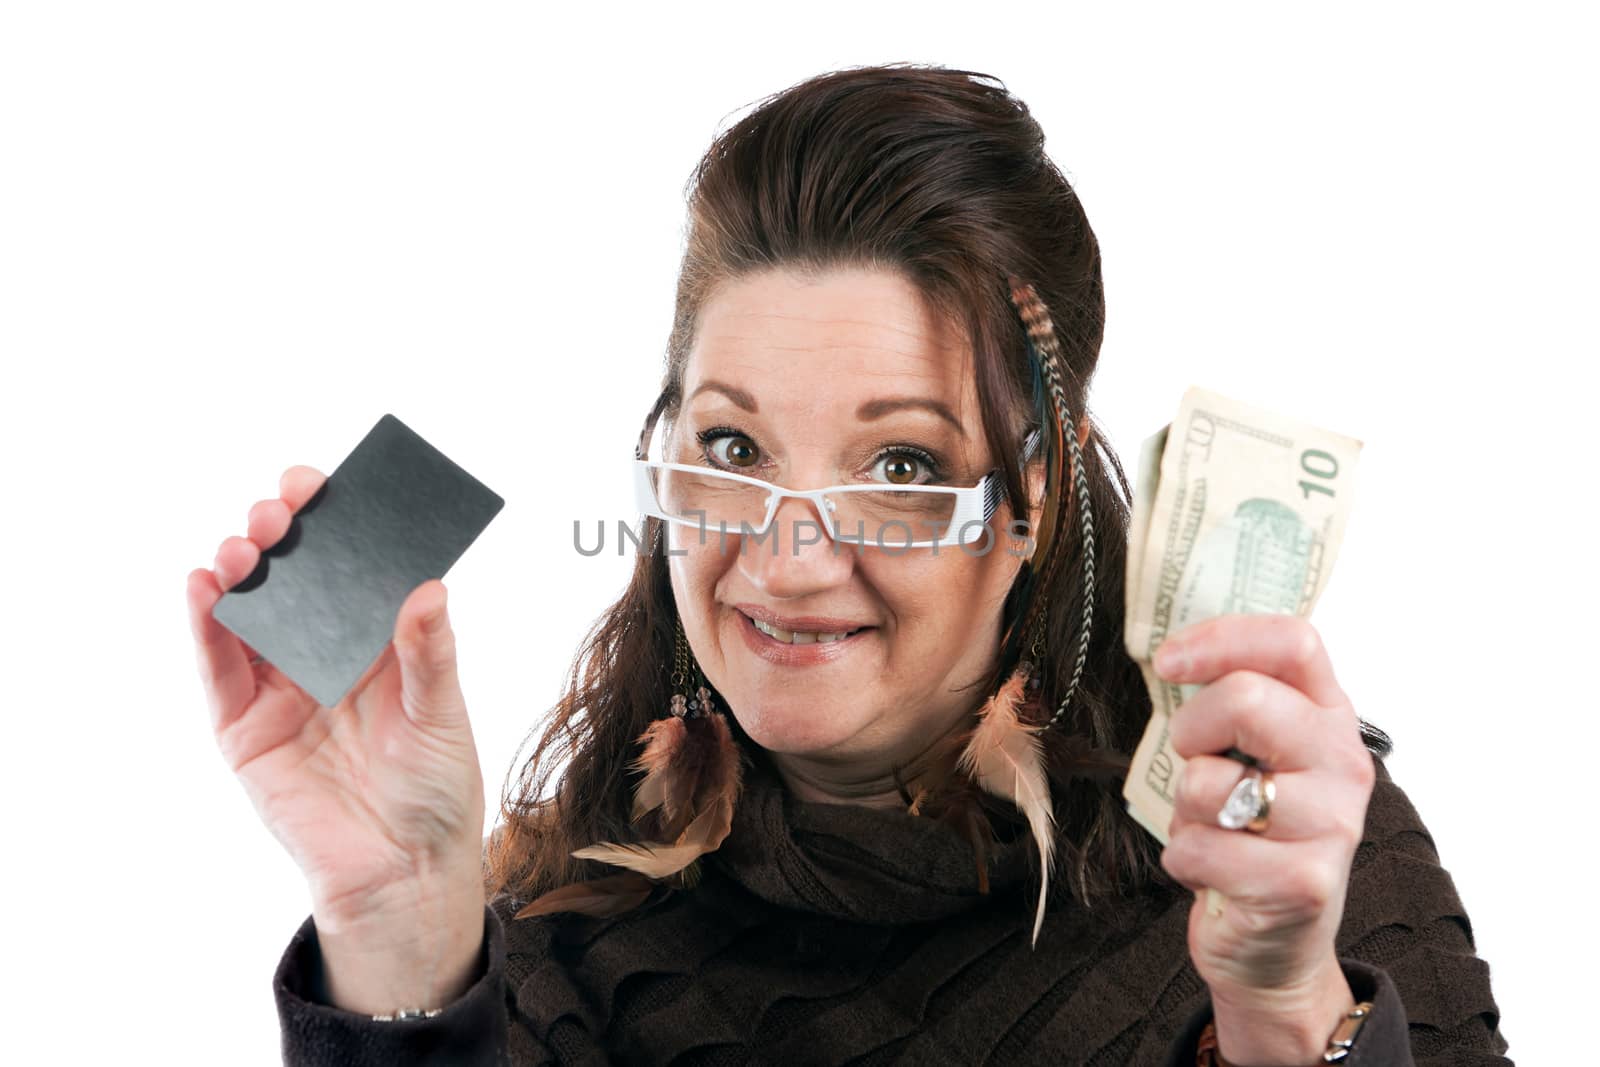 Brunette woman holding up a blank credit card business card shoppers club card or gift card of some sort along with some cash in her other hand.